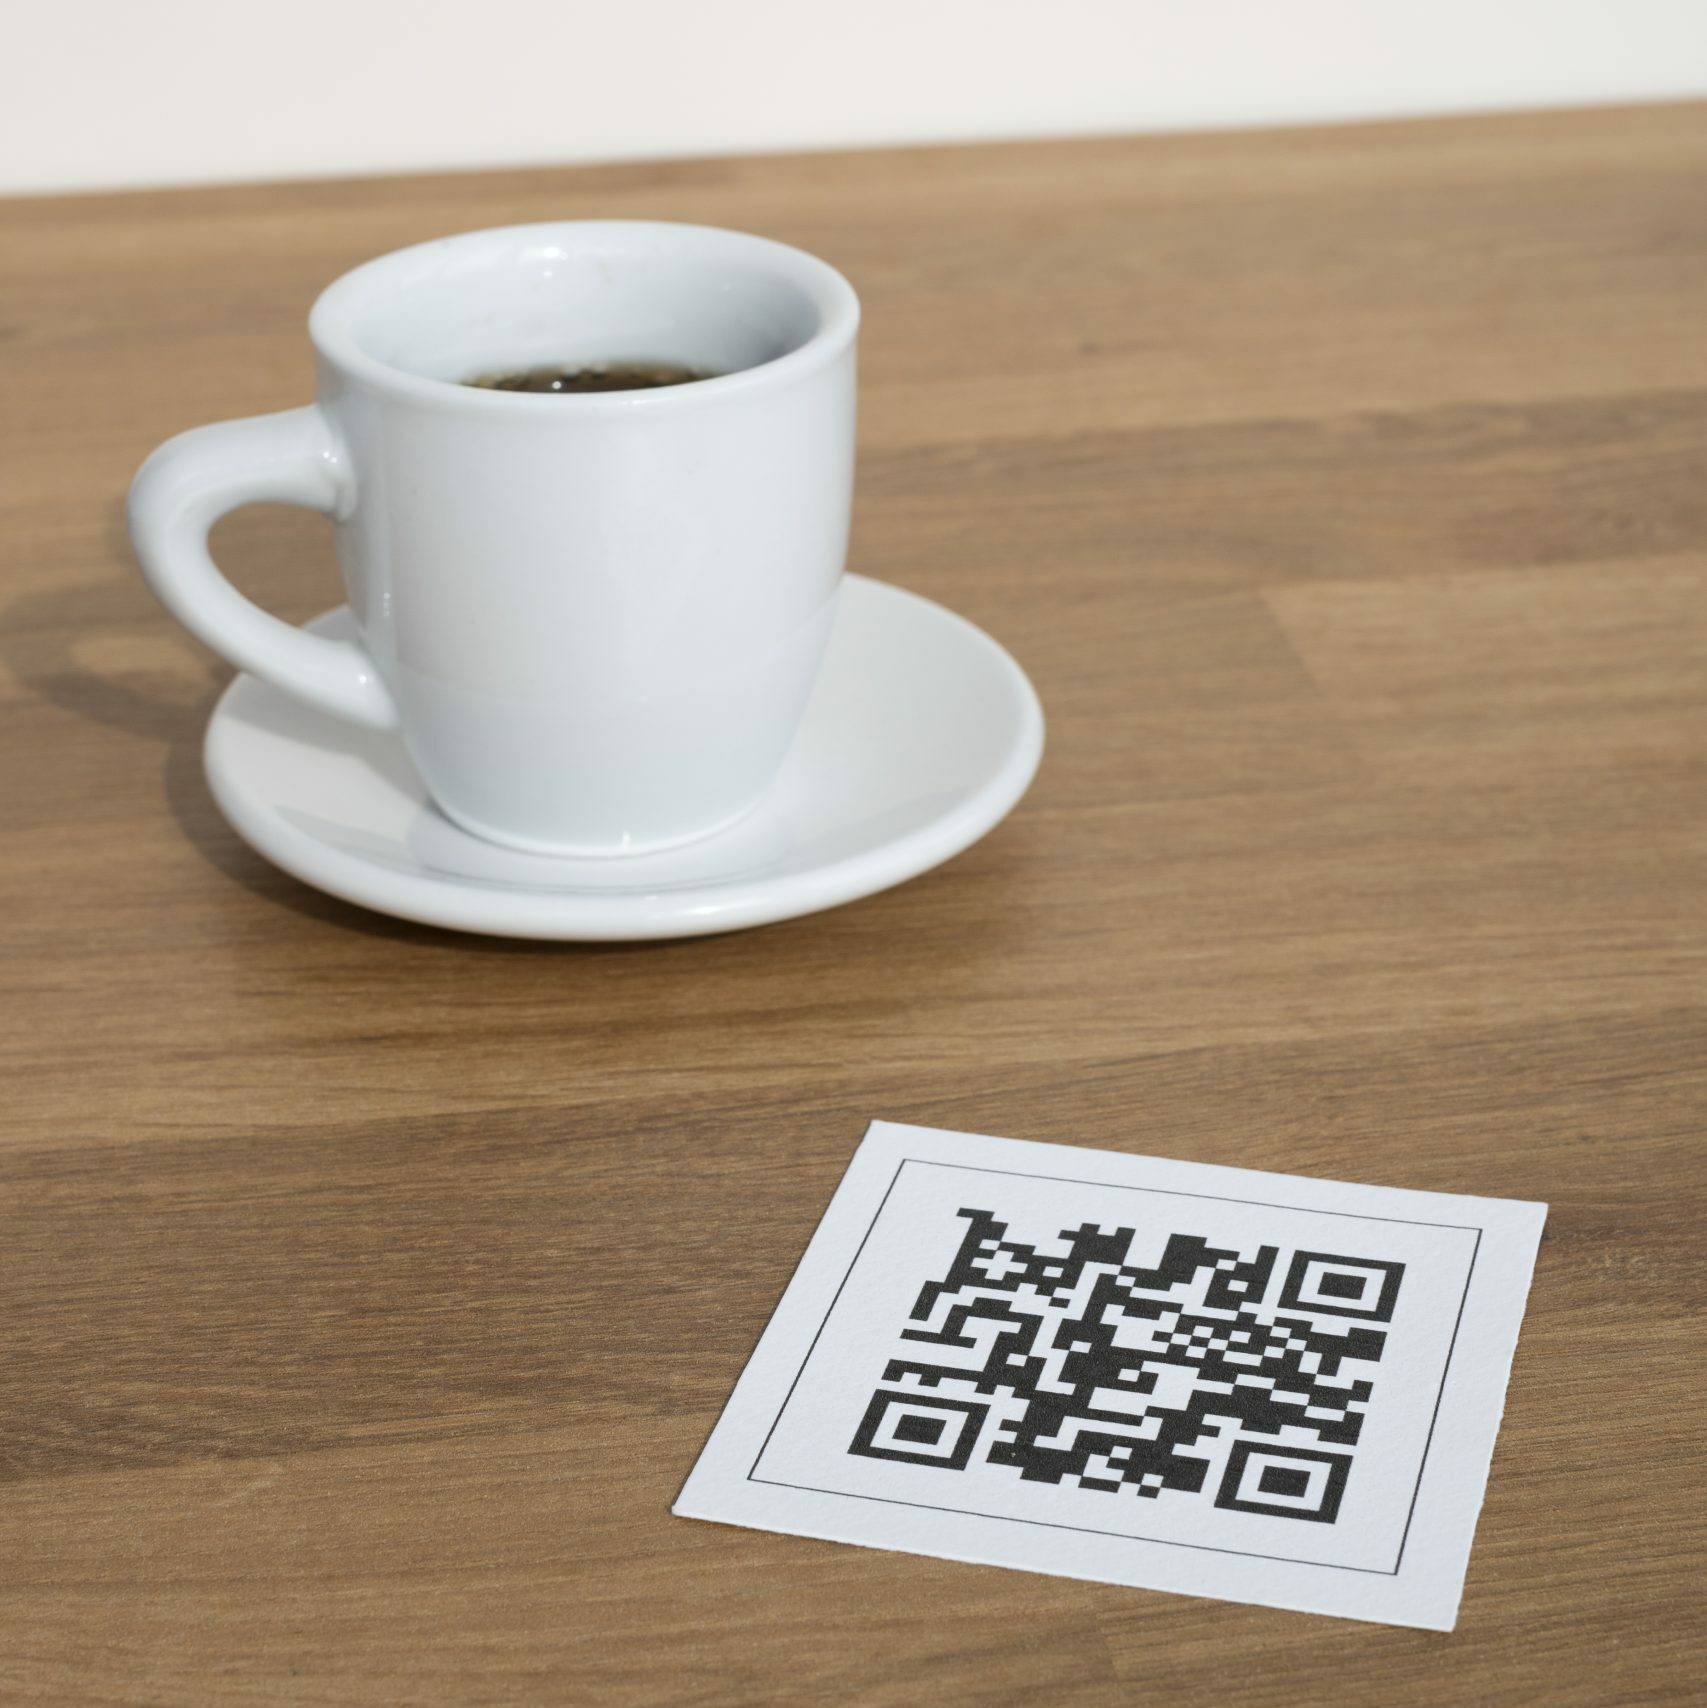 qr-code-online-menu-service-table-restaurant-new-contactless-technology-lifestyle-protect